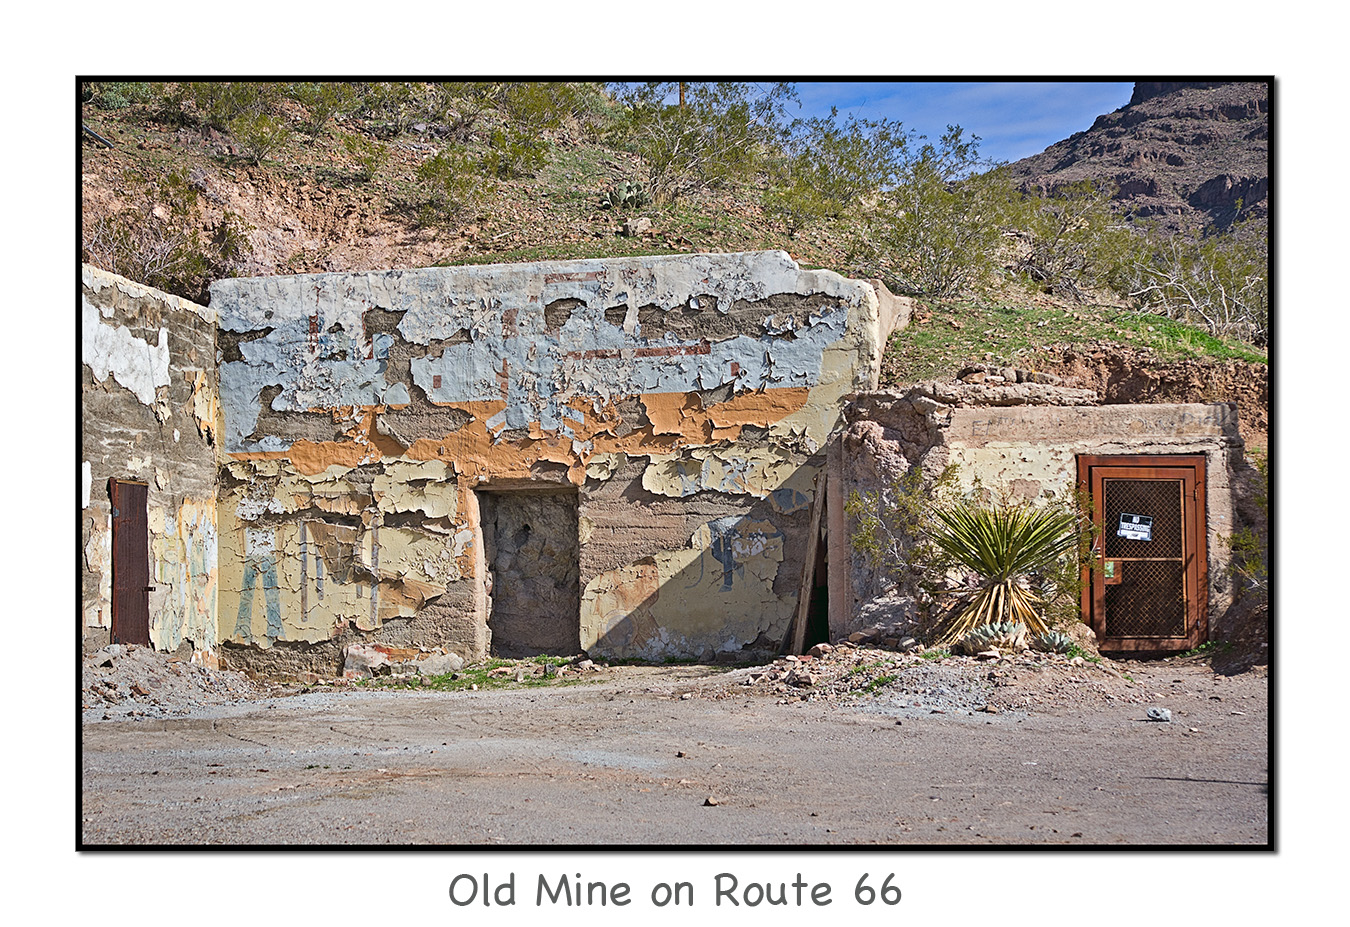 Old Gold Mine on Route 66